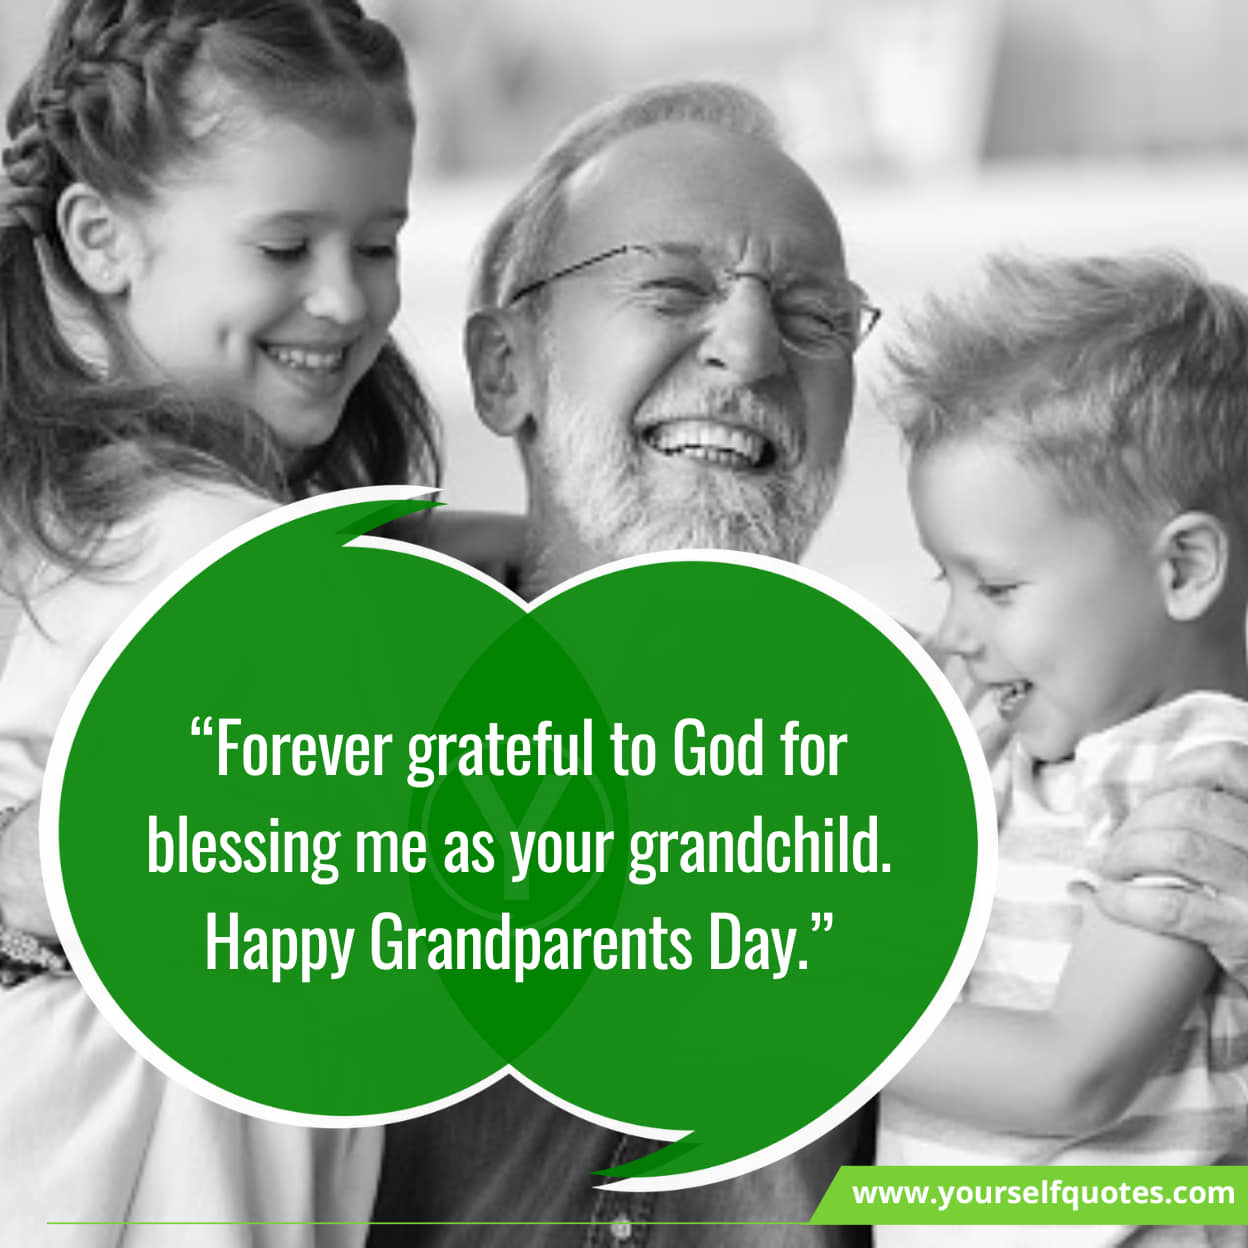 Latest Heart-Warming Happy Grandparents Day Wishes Messages (2)